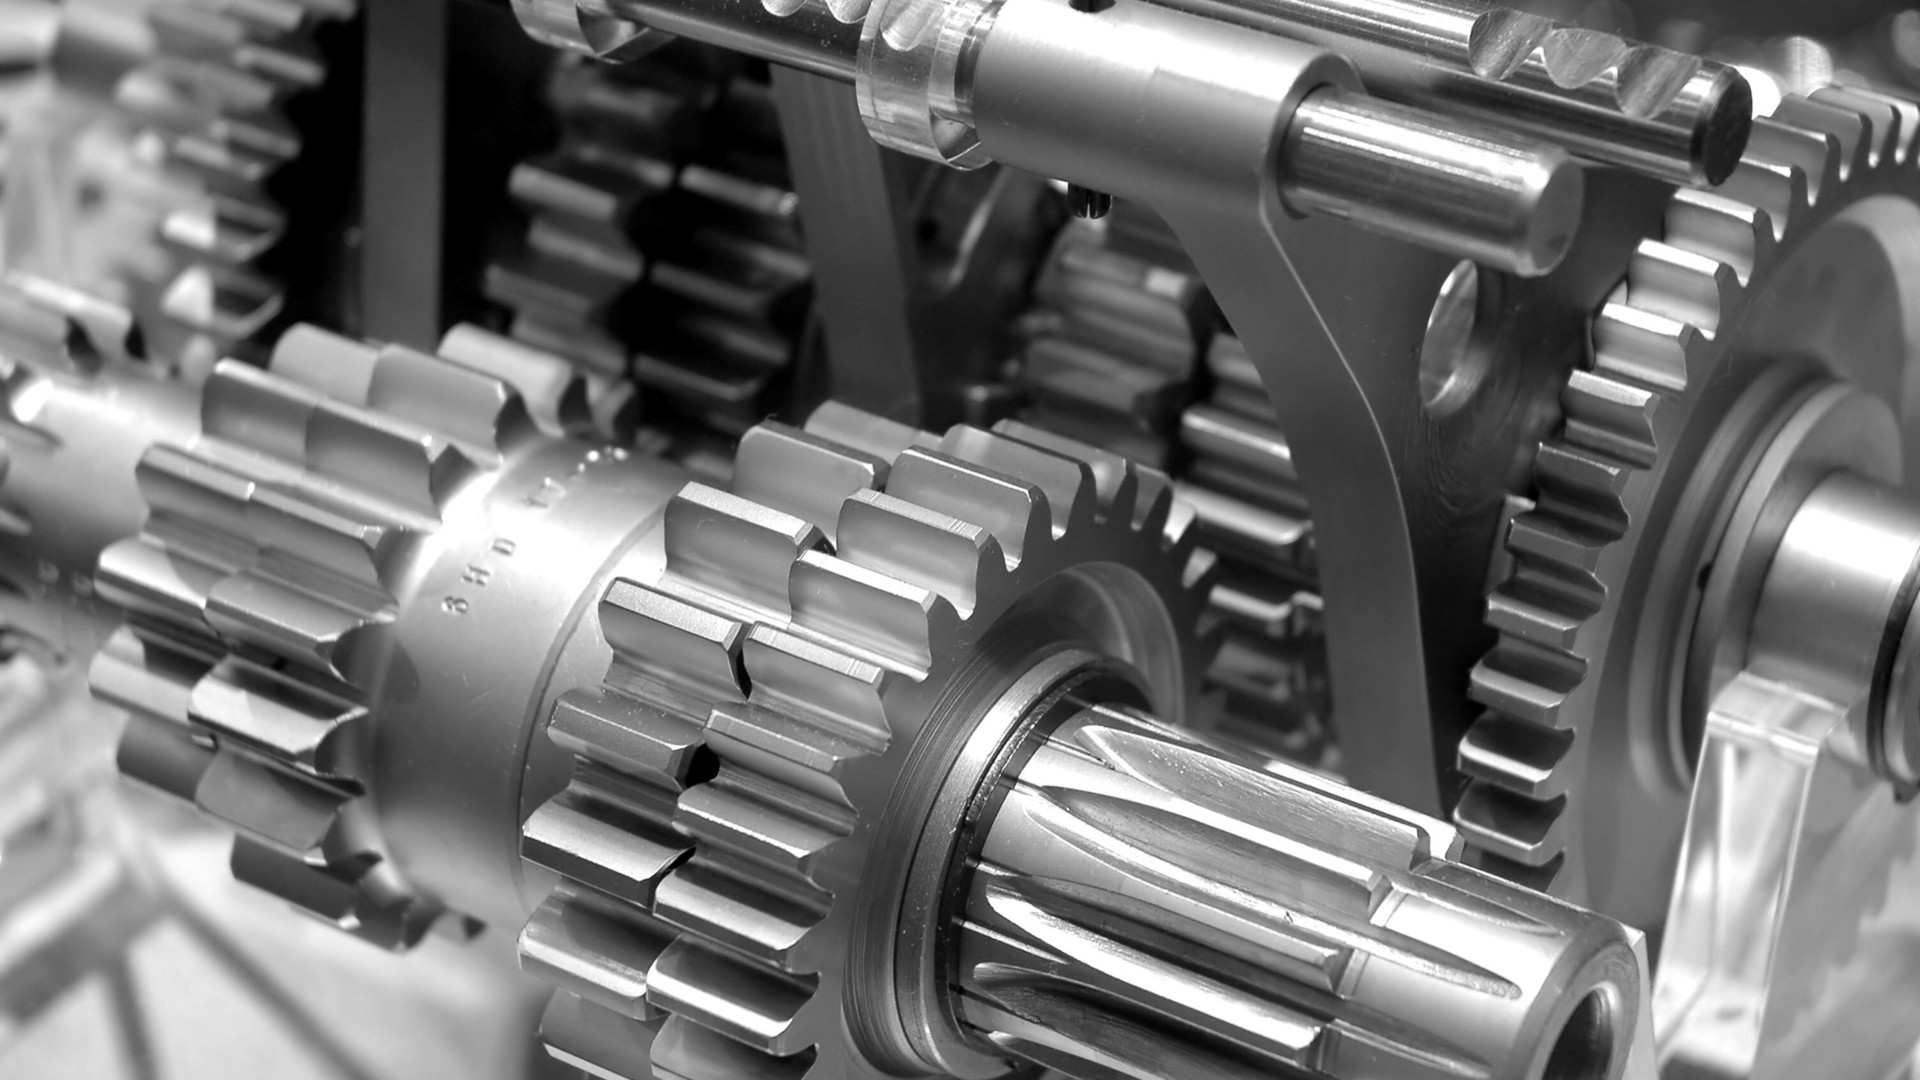 1920x1080 Backgrounds For > Mechanical Engineering Logos Wallpapers Backgrounds